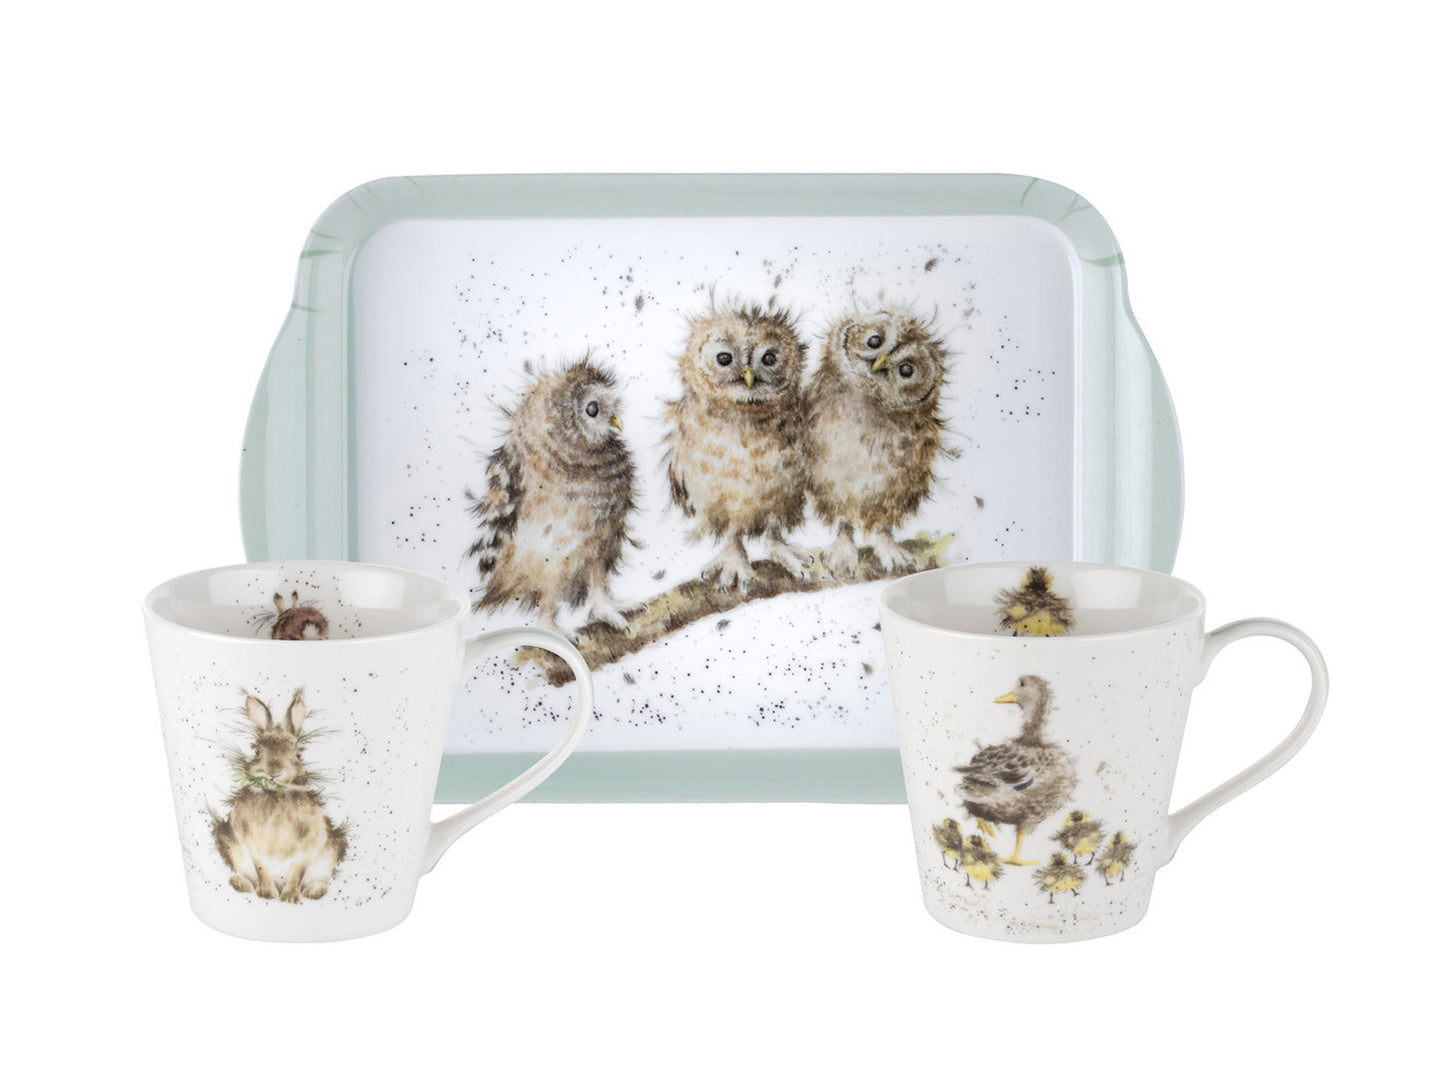 A white melamine tray with a light blue edge with two white china mugs, all featuring different watercolour animal designs on them